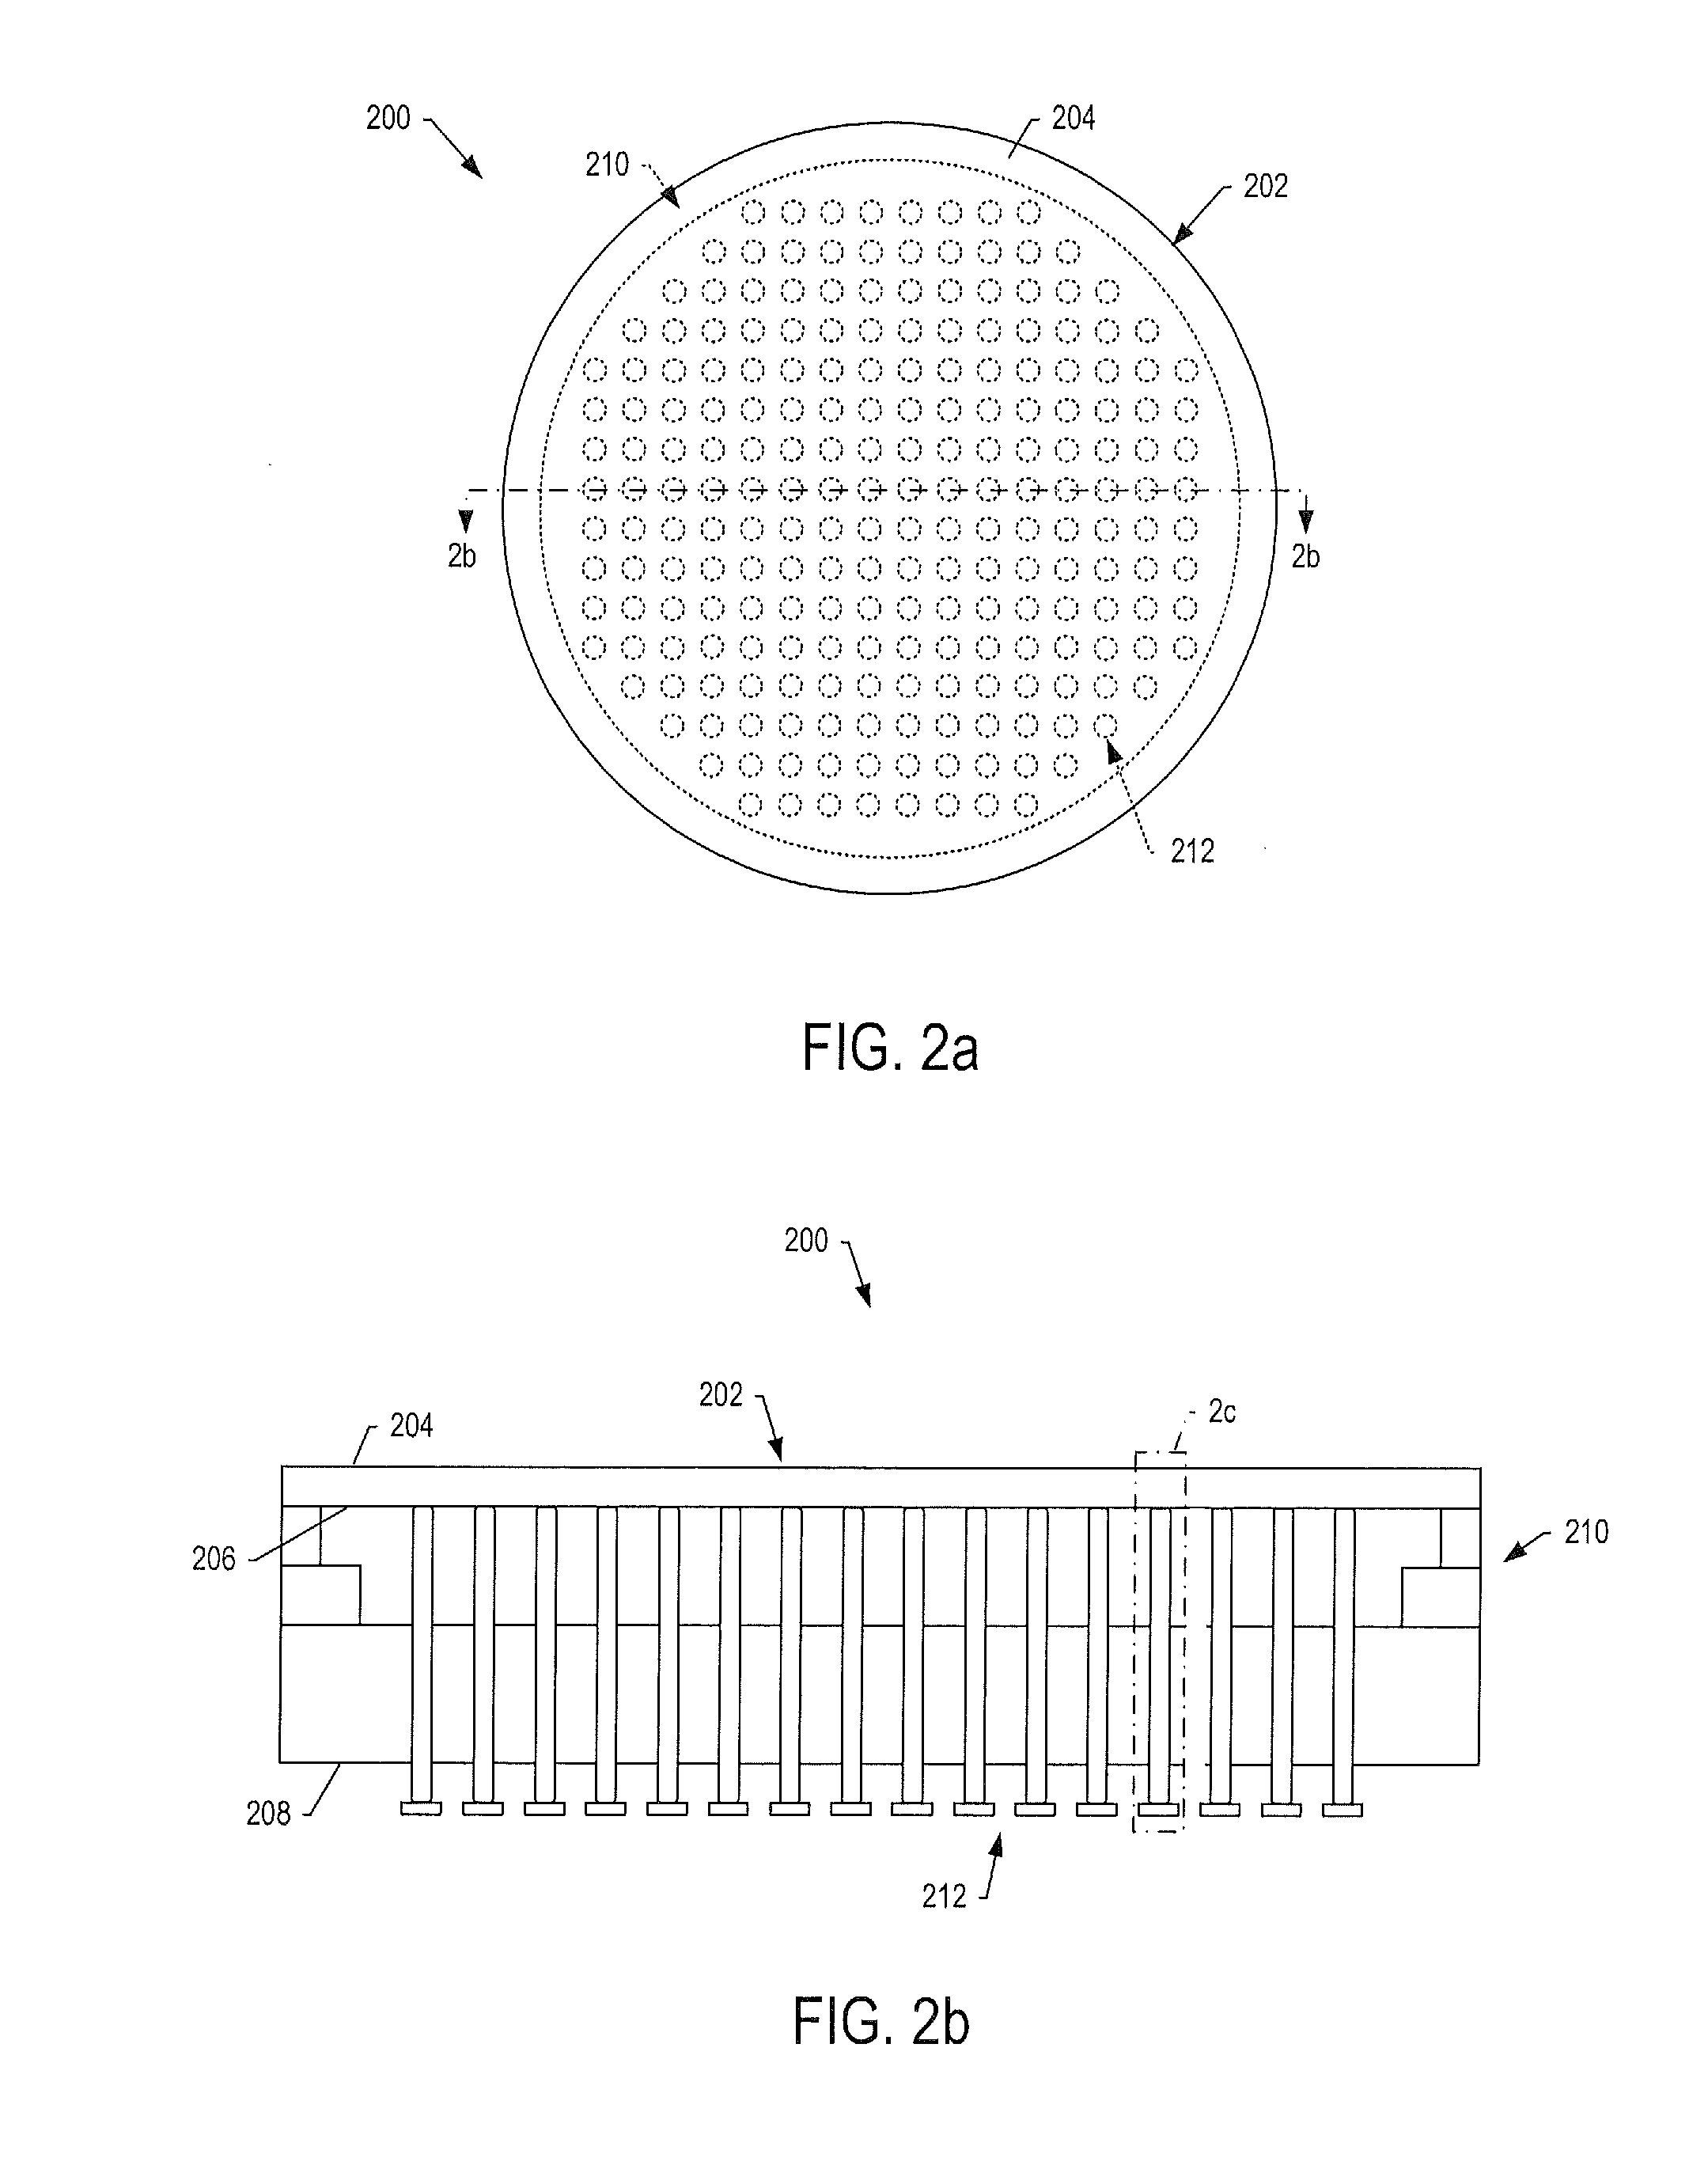 Modal Corrector Mirror With Compliant Actuation For Optical Aberrations